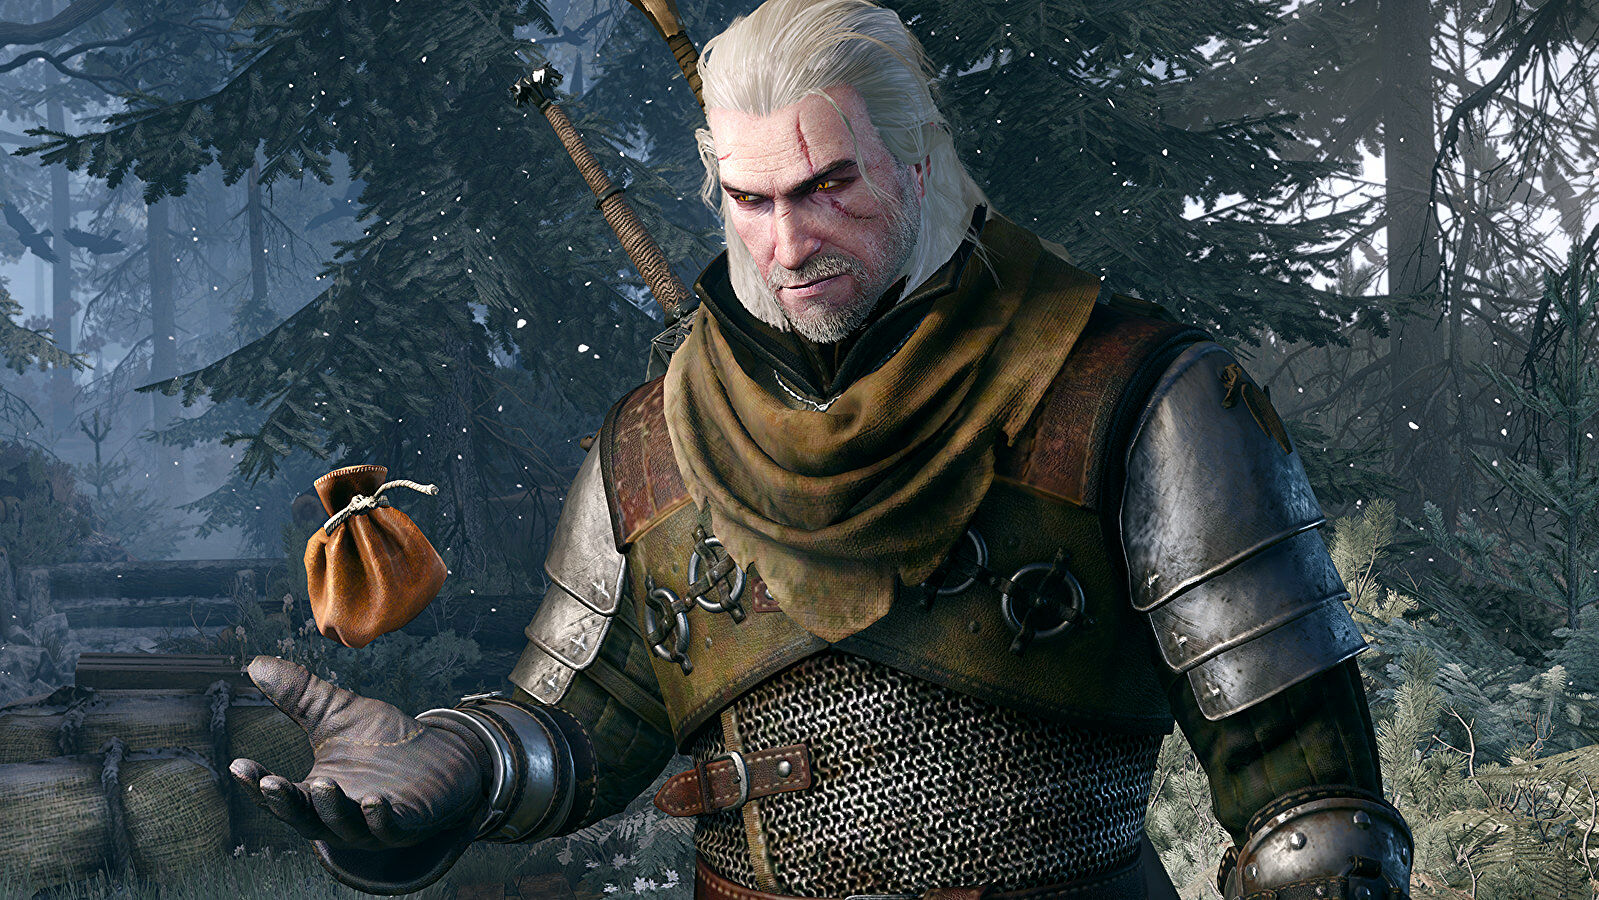 a-fresh-hotfix-means-the-witcher-3's-next-gen-update-might-work-now